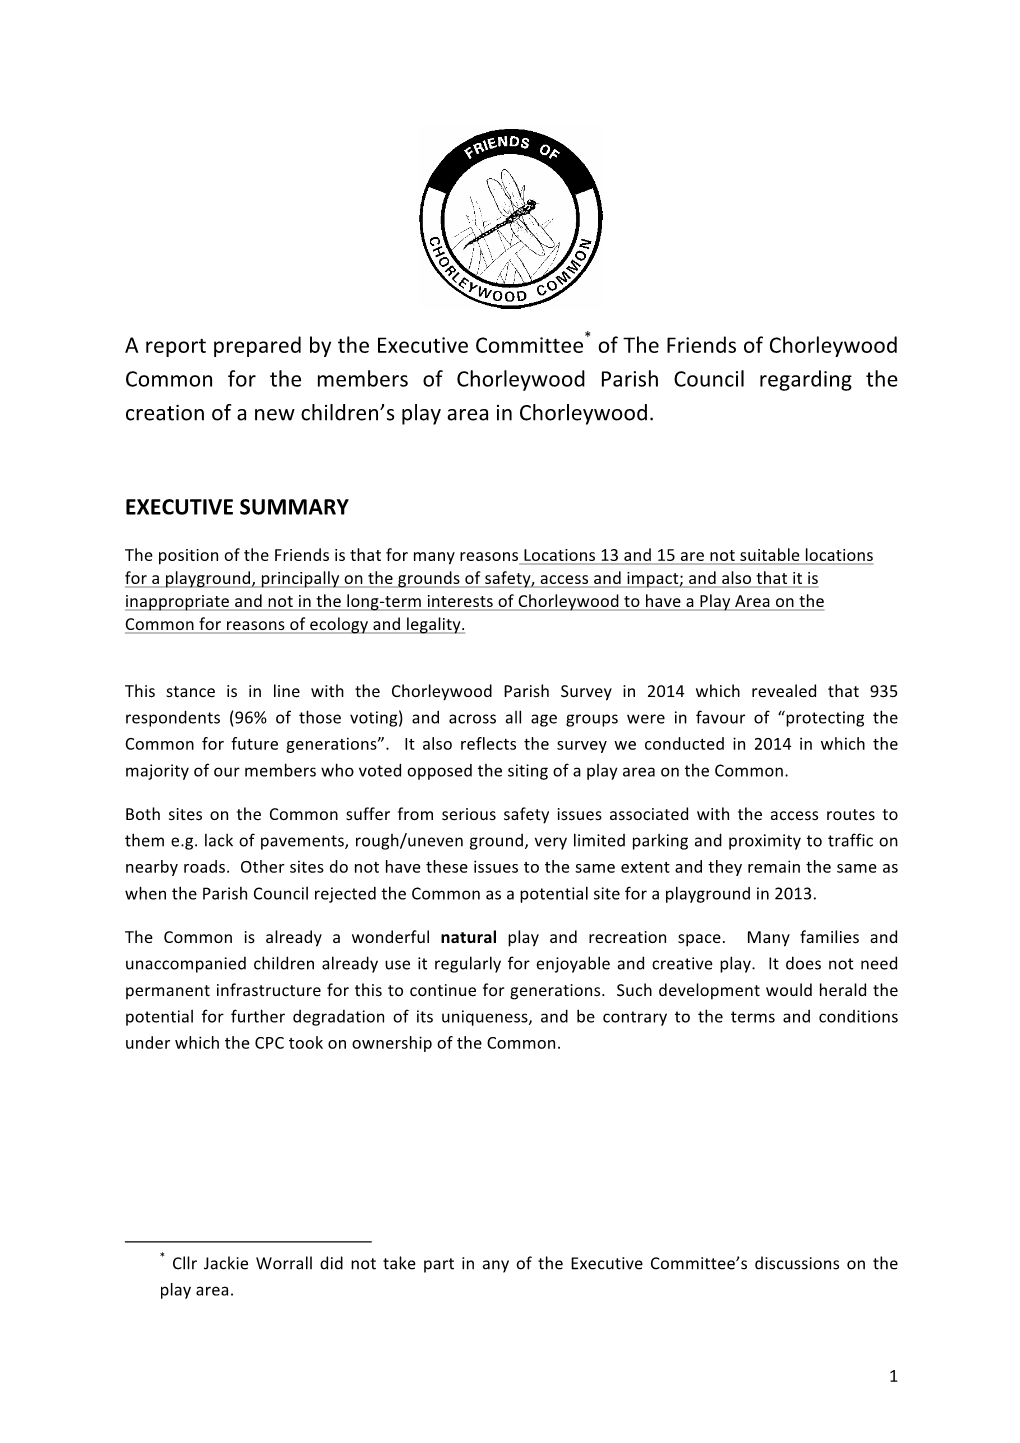 Full Text of Our Report to the PACAC (15 Oct 2015)